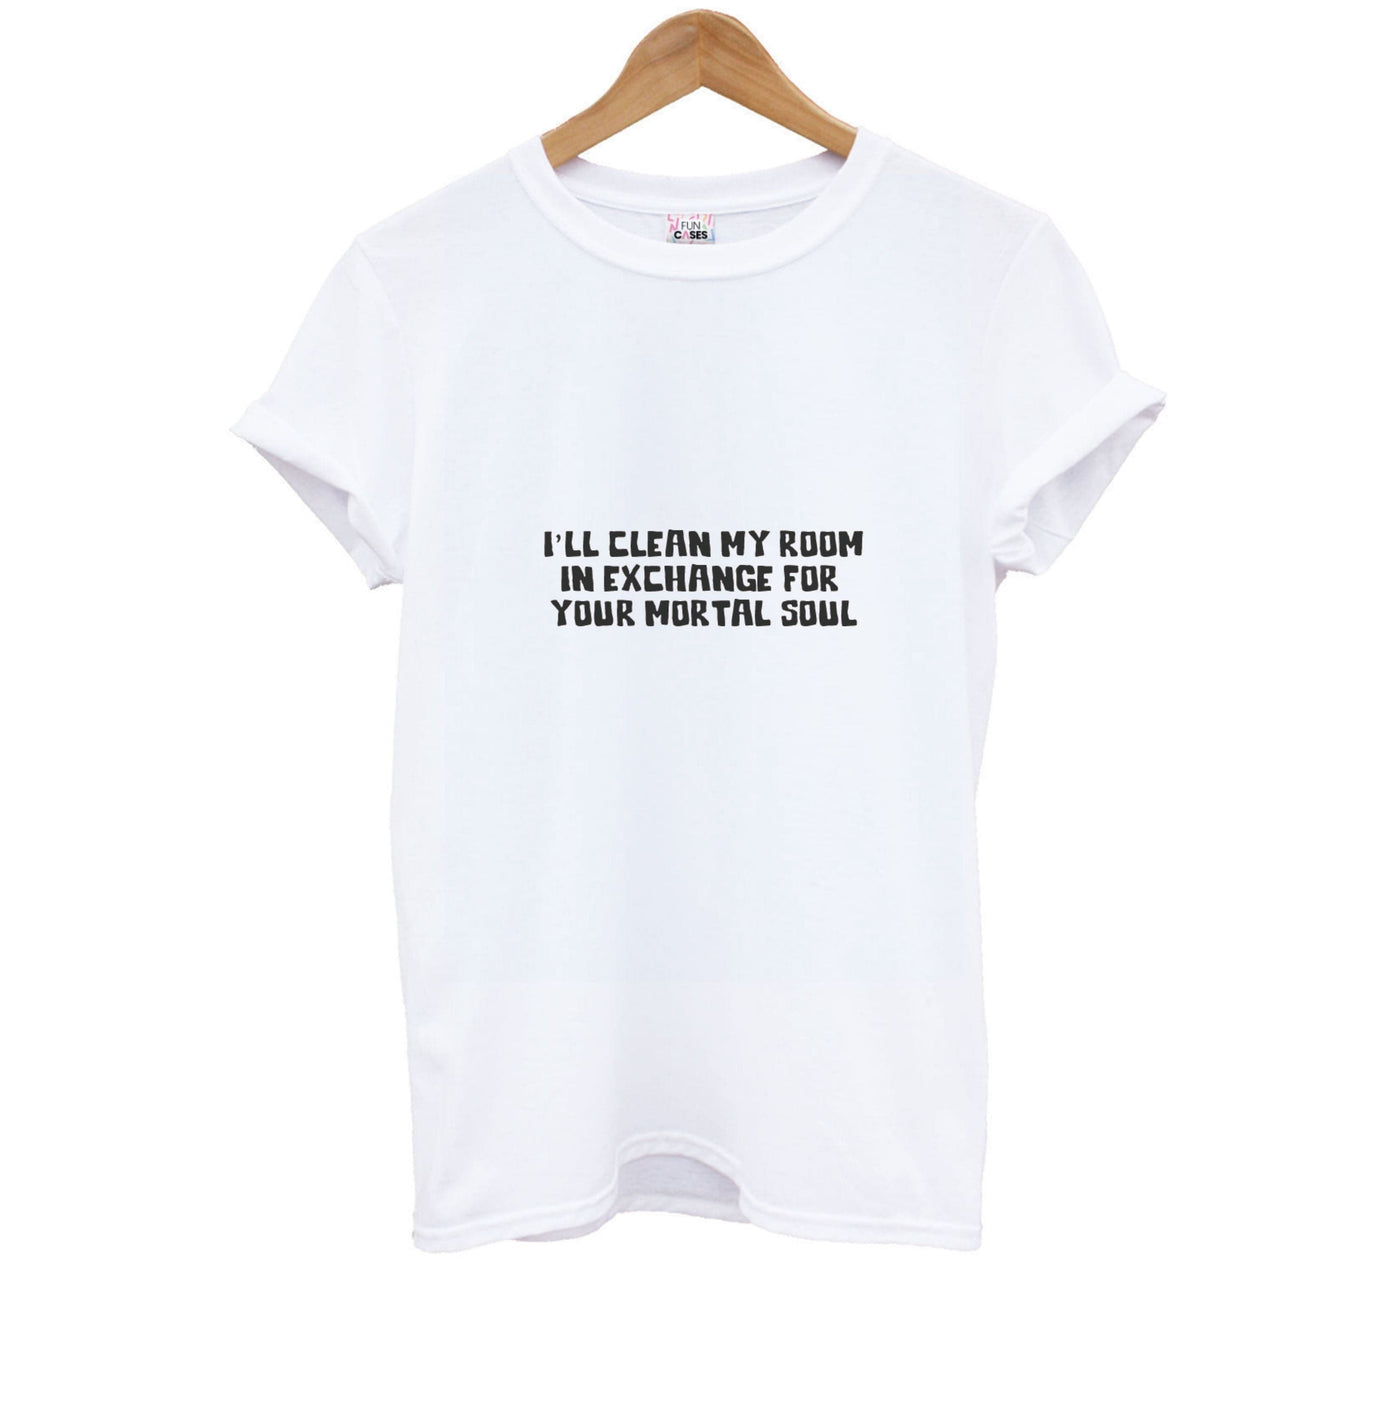 I'll Clean My Room In Exchange - Wednesday Kids T-Shirt